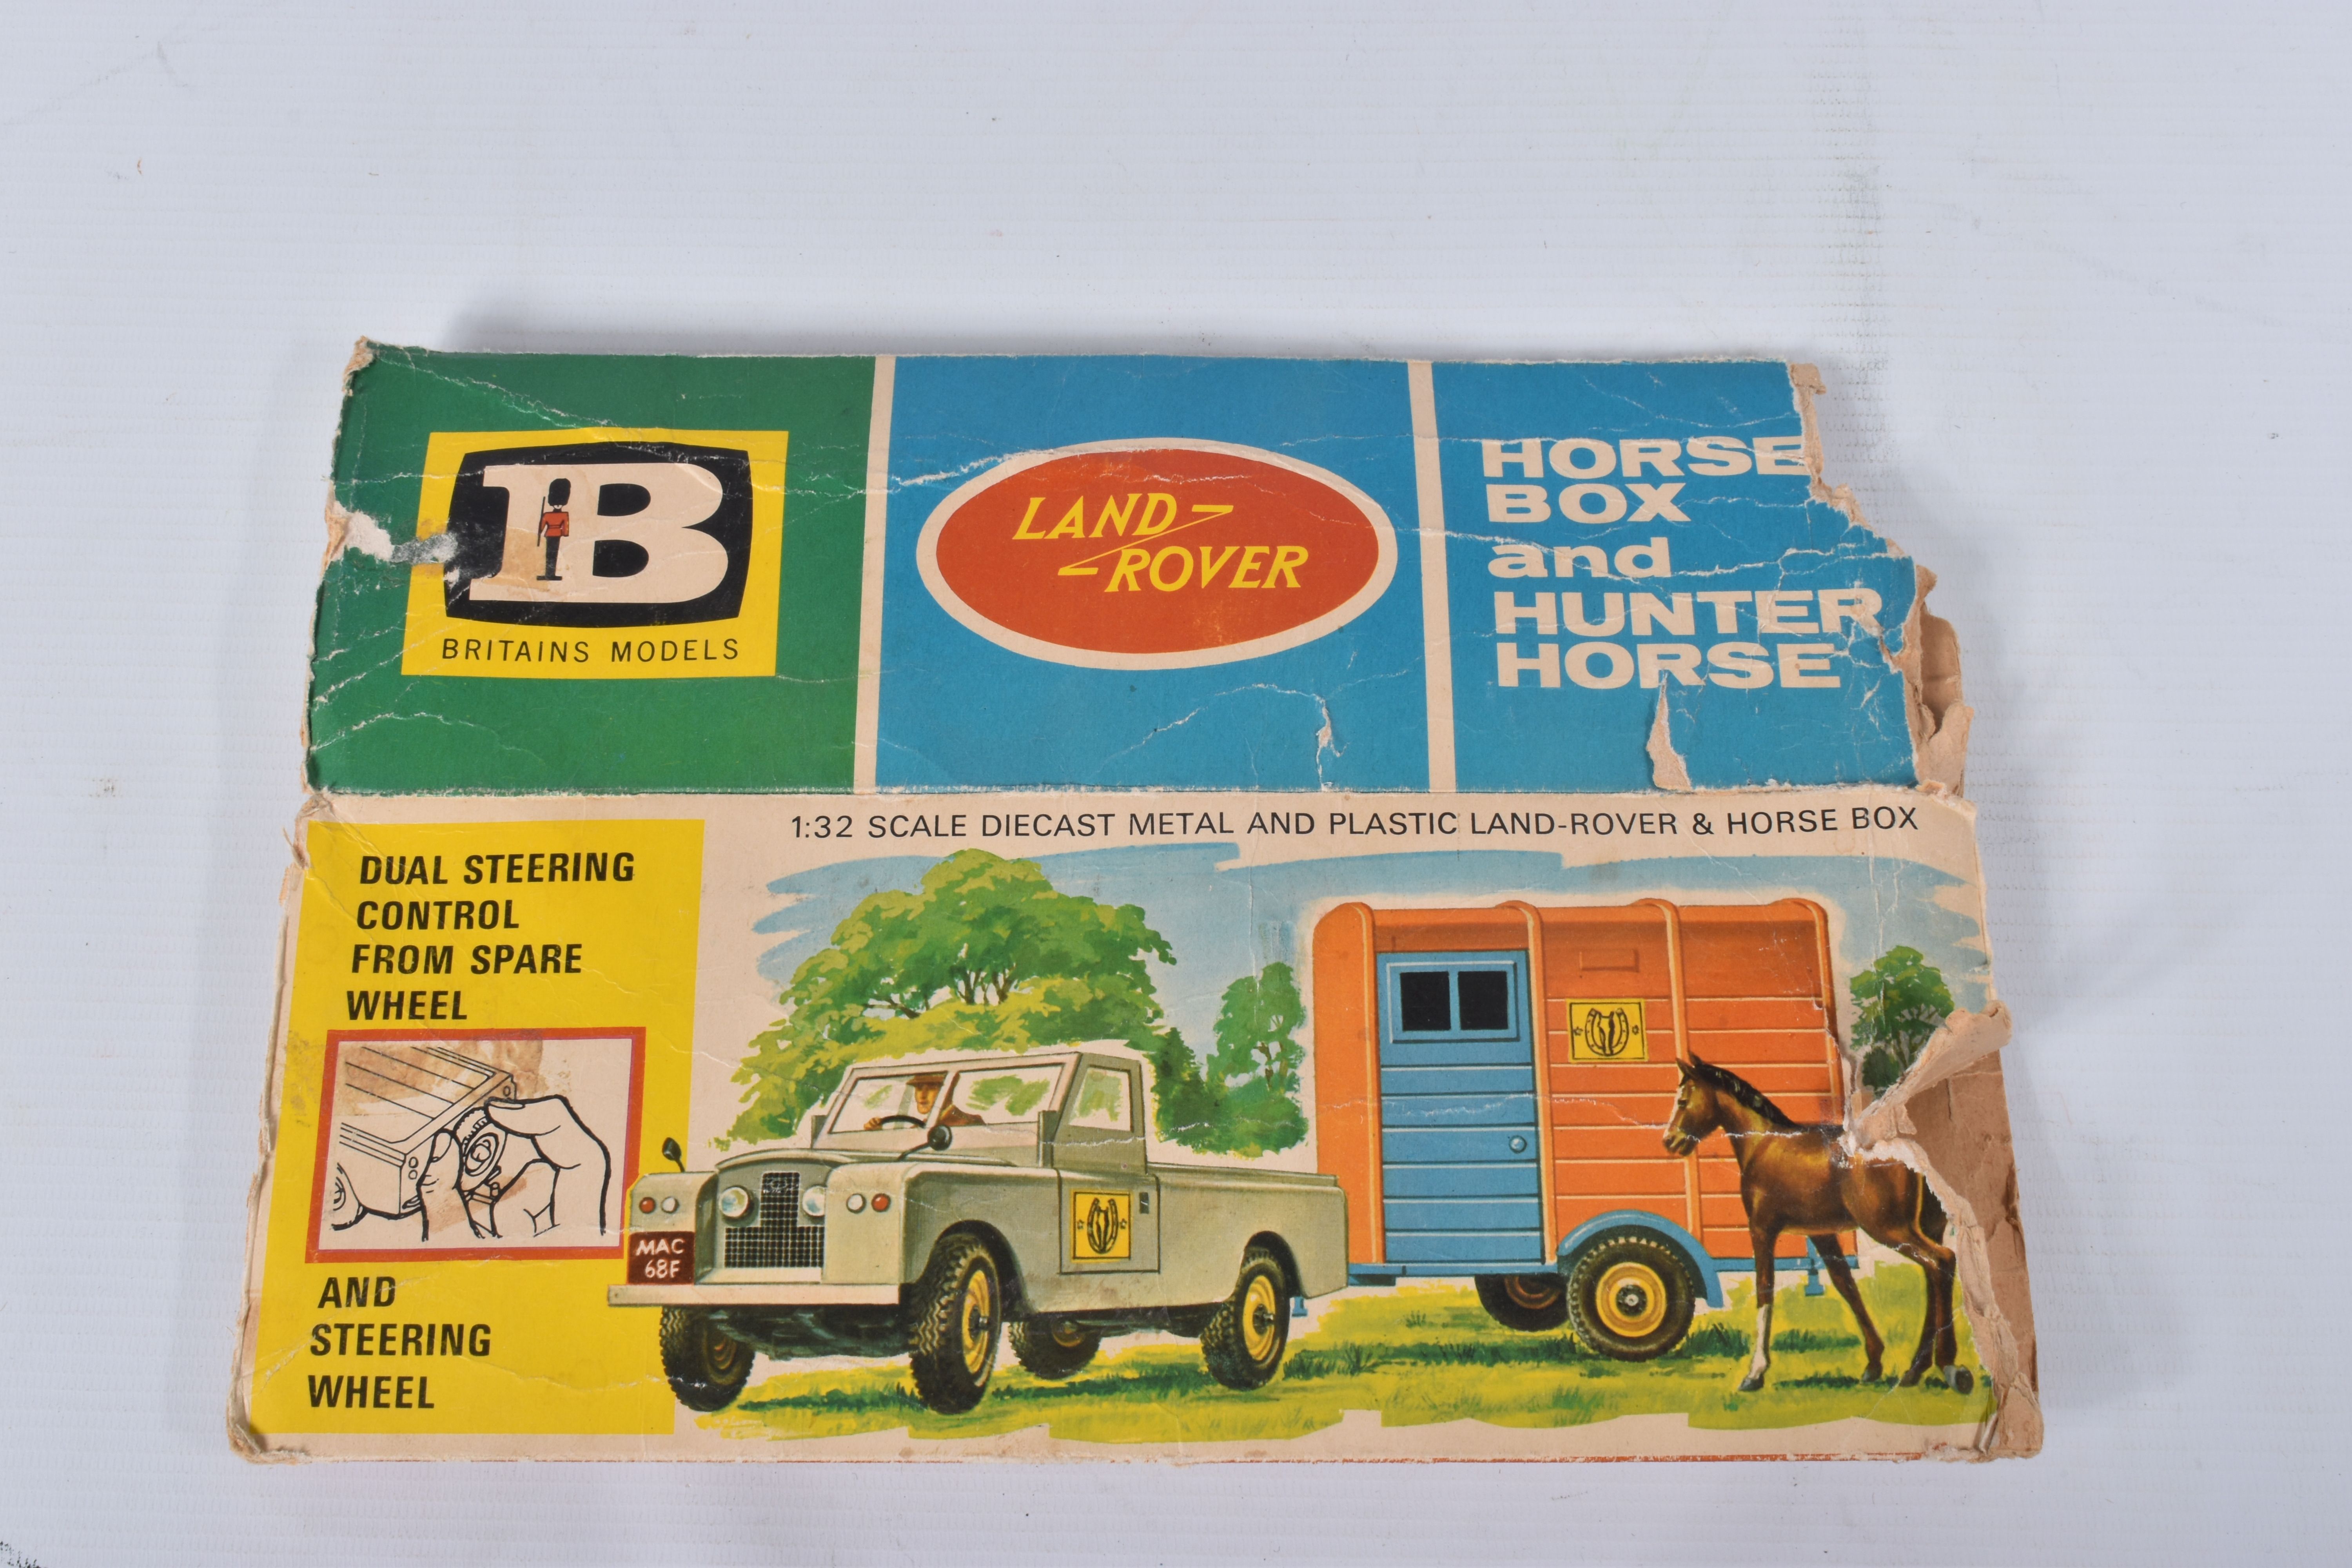 A BOXED BRITAINS LAND ROVER, HORSE BOX AND HUNTER HORSE, No.9575, playworn condition with some paint - Image 10 of 10